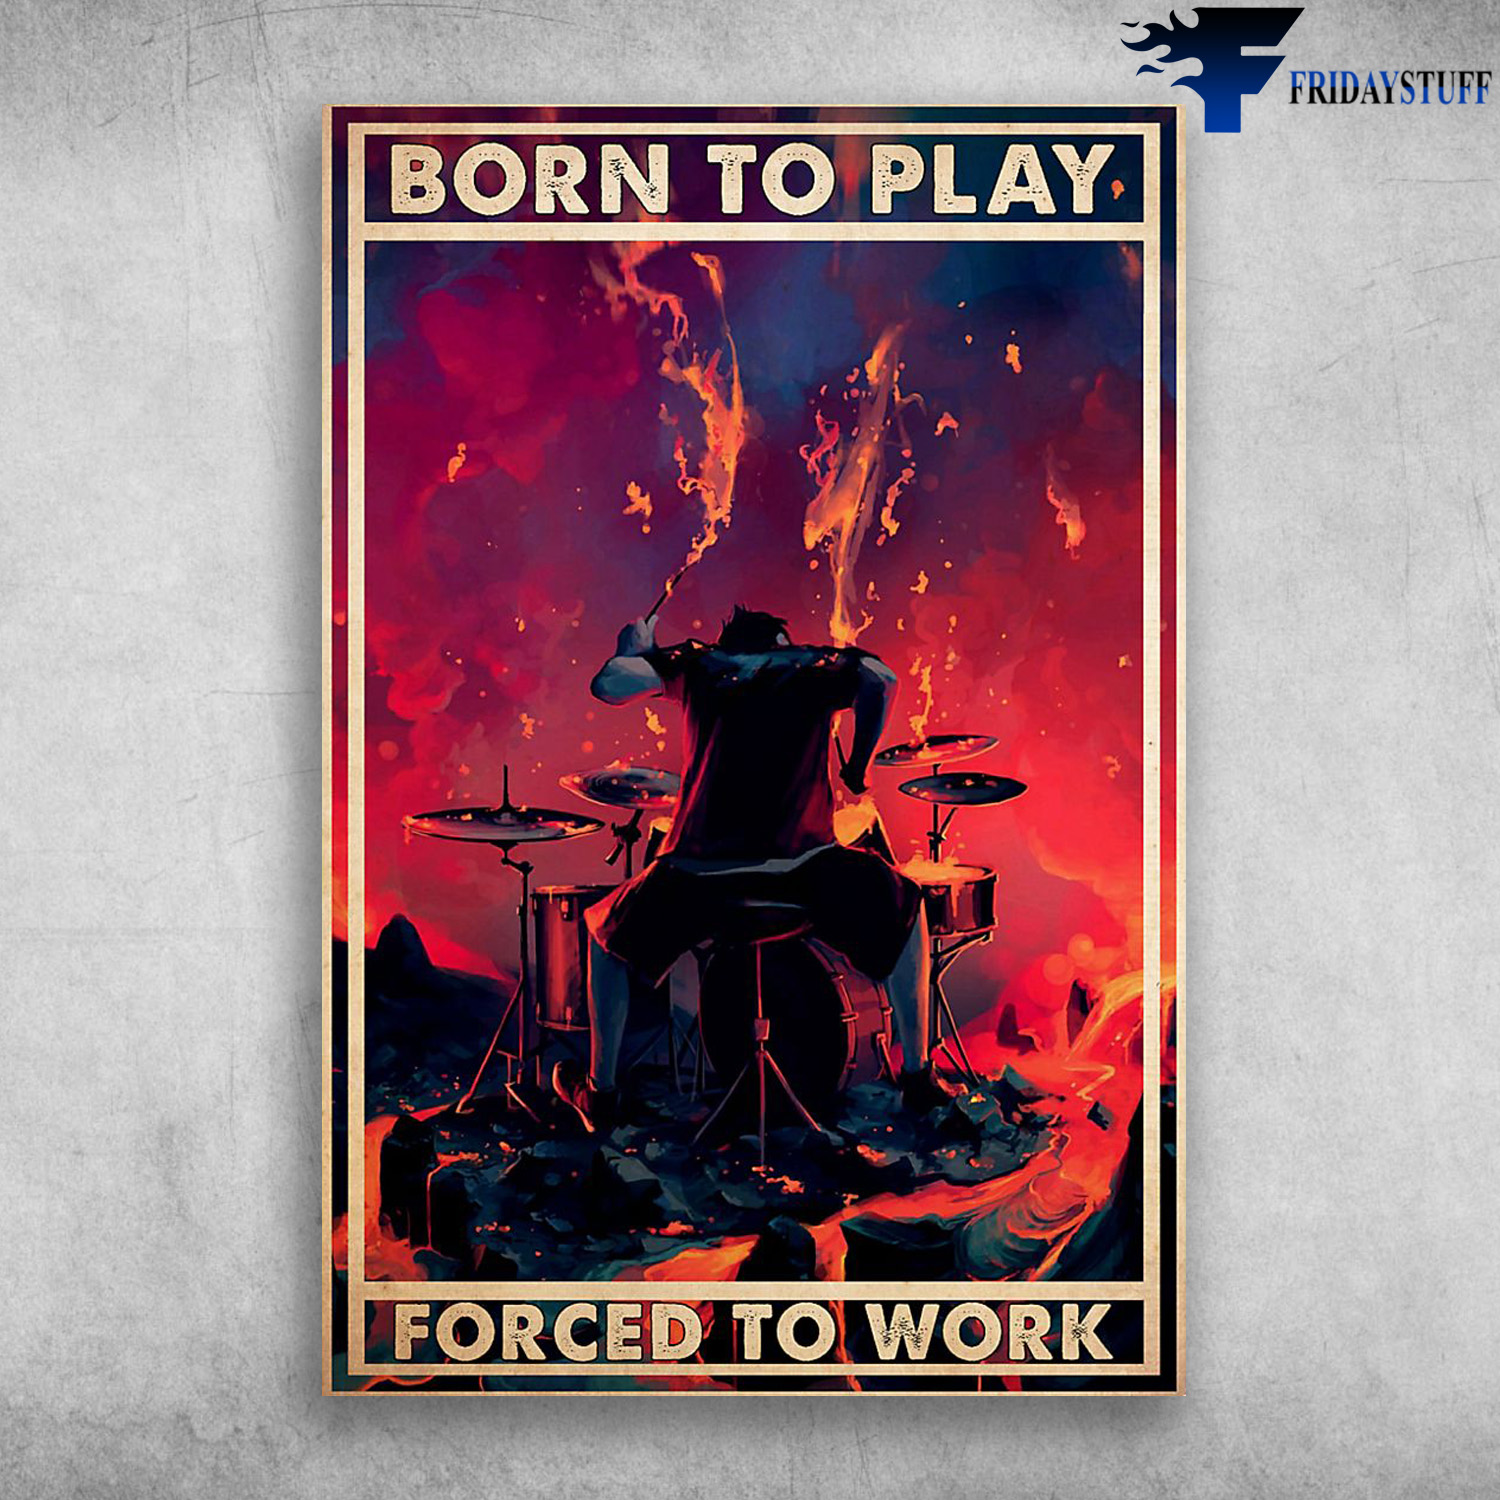 Man Drumming - Born To Play, Forced To Work